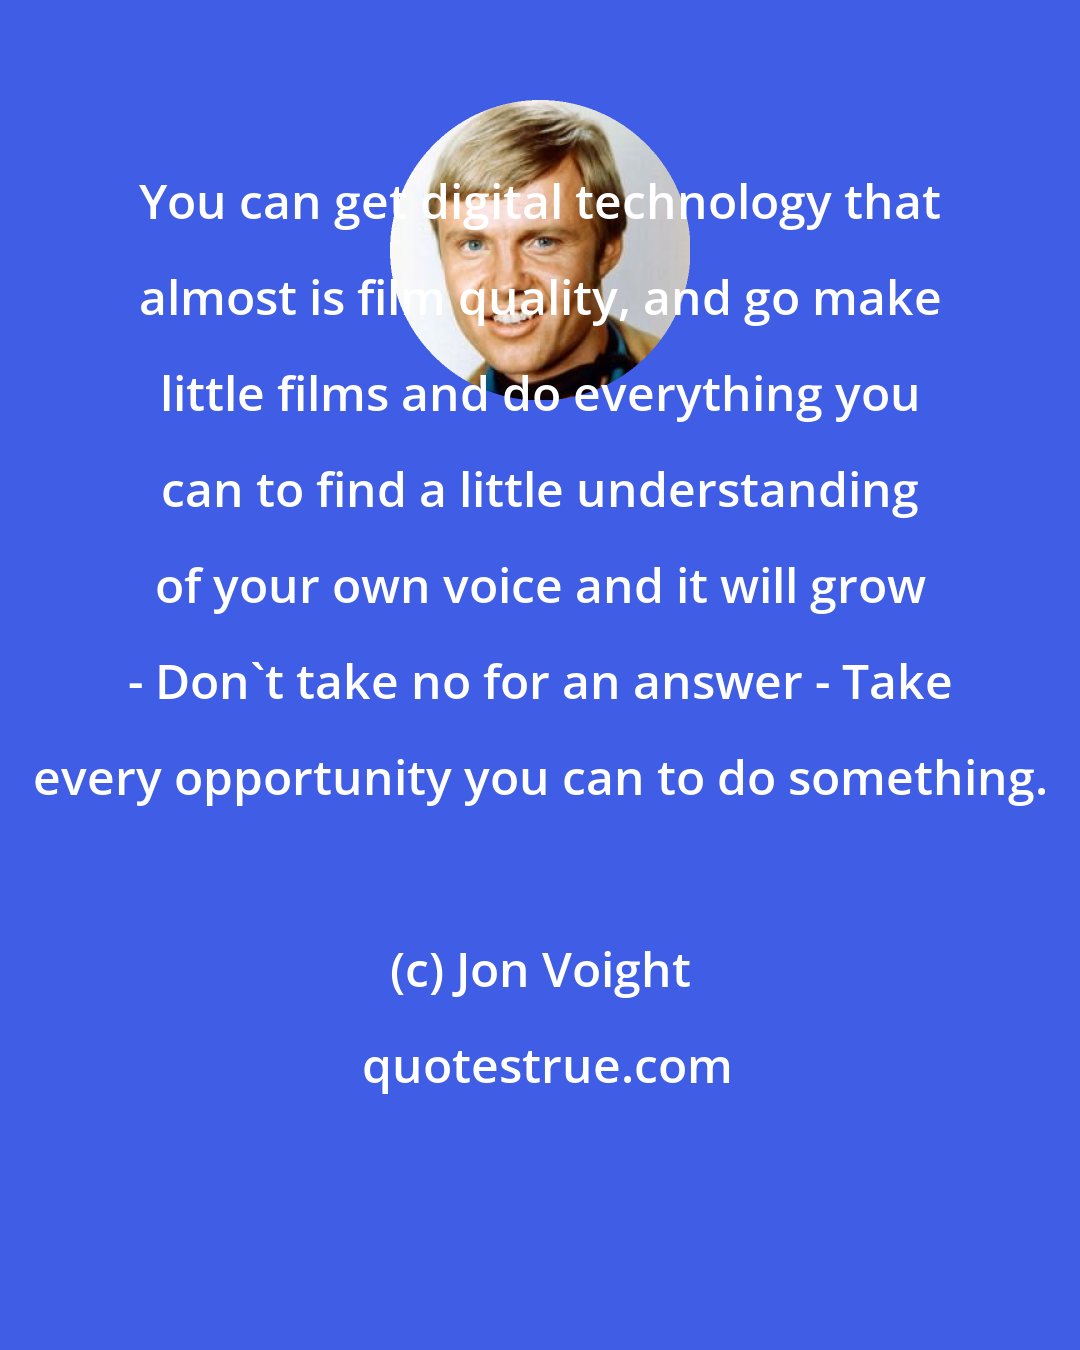 Jon Voight: You can get digital technology that almost is film quality, and go make little films and do everything you can to find a little understanding of your own voice and it will grow - Don't take no for an answer - Take every opportunity you can to do something.